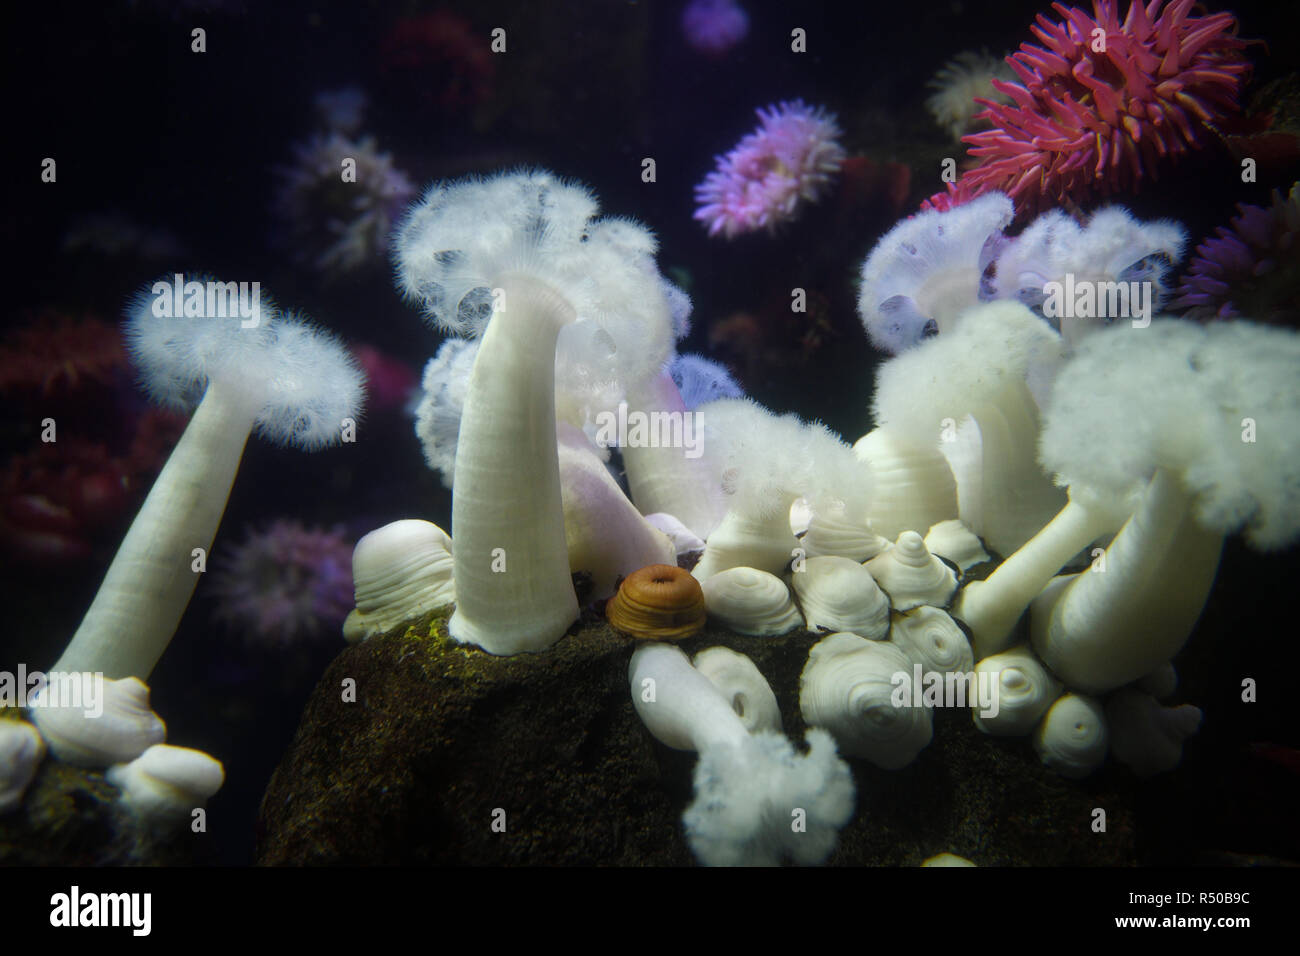 Expanded and contracted White Giant Plumose Anemone of the Pacific Ocean Stock Photo